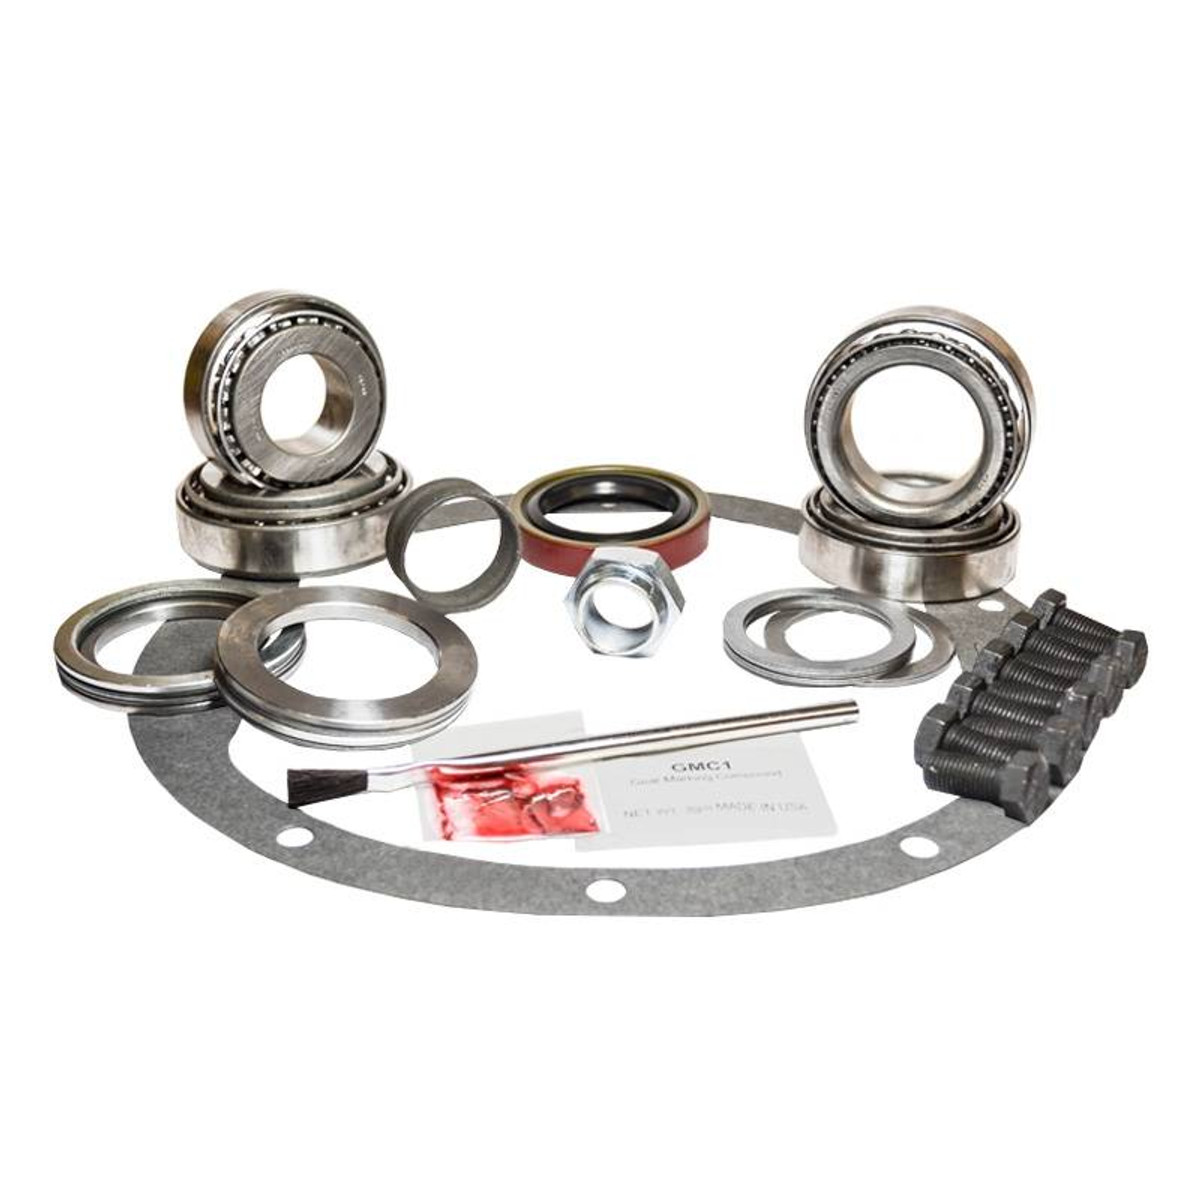 GM 8.5 Inch Rear Master Install Kit Aftermarket LSD Front MKGM8.5-HD